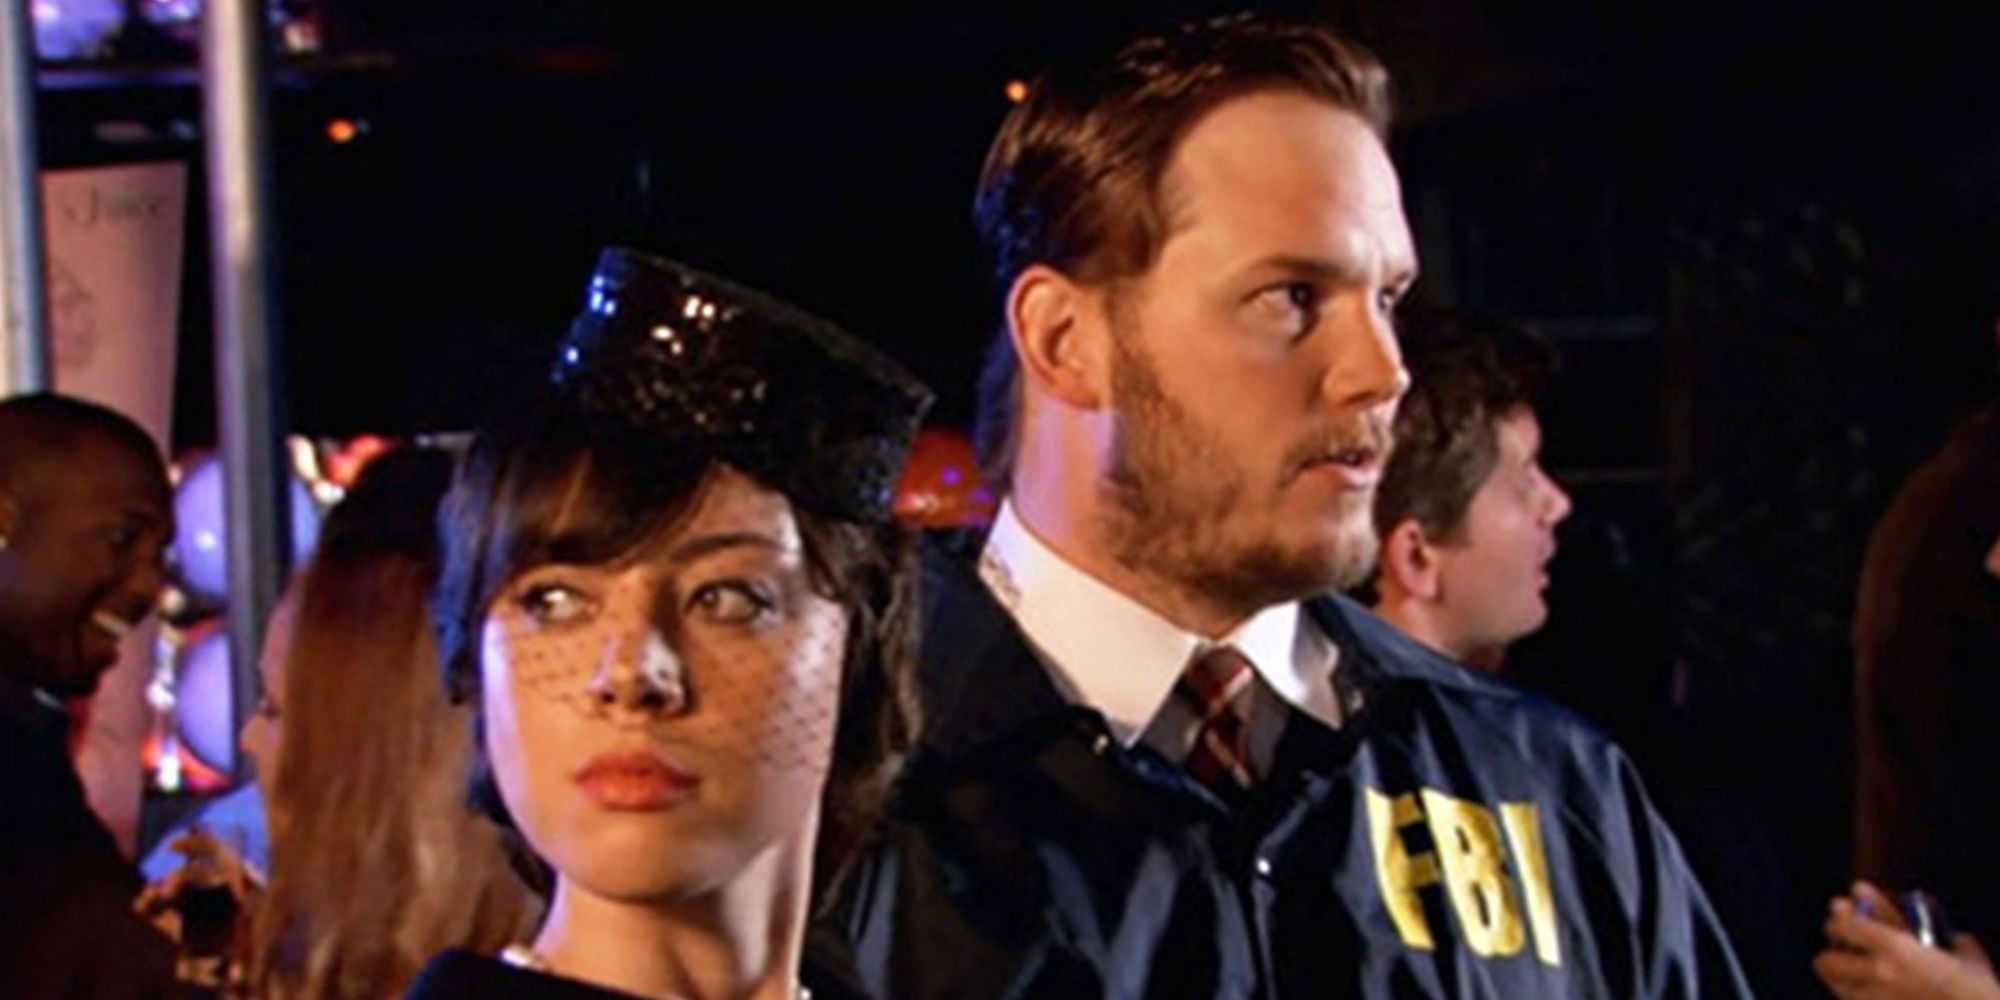 Andy and April from Parks and Recreations as their alter egos Janet Snakehole and Burt Macklin